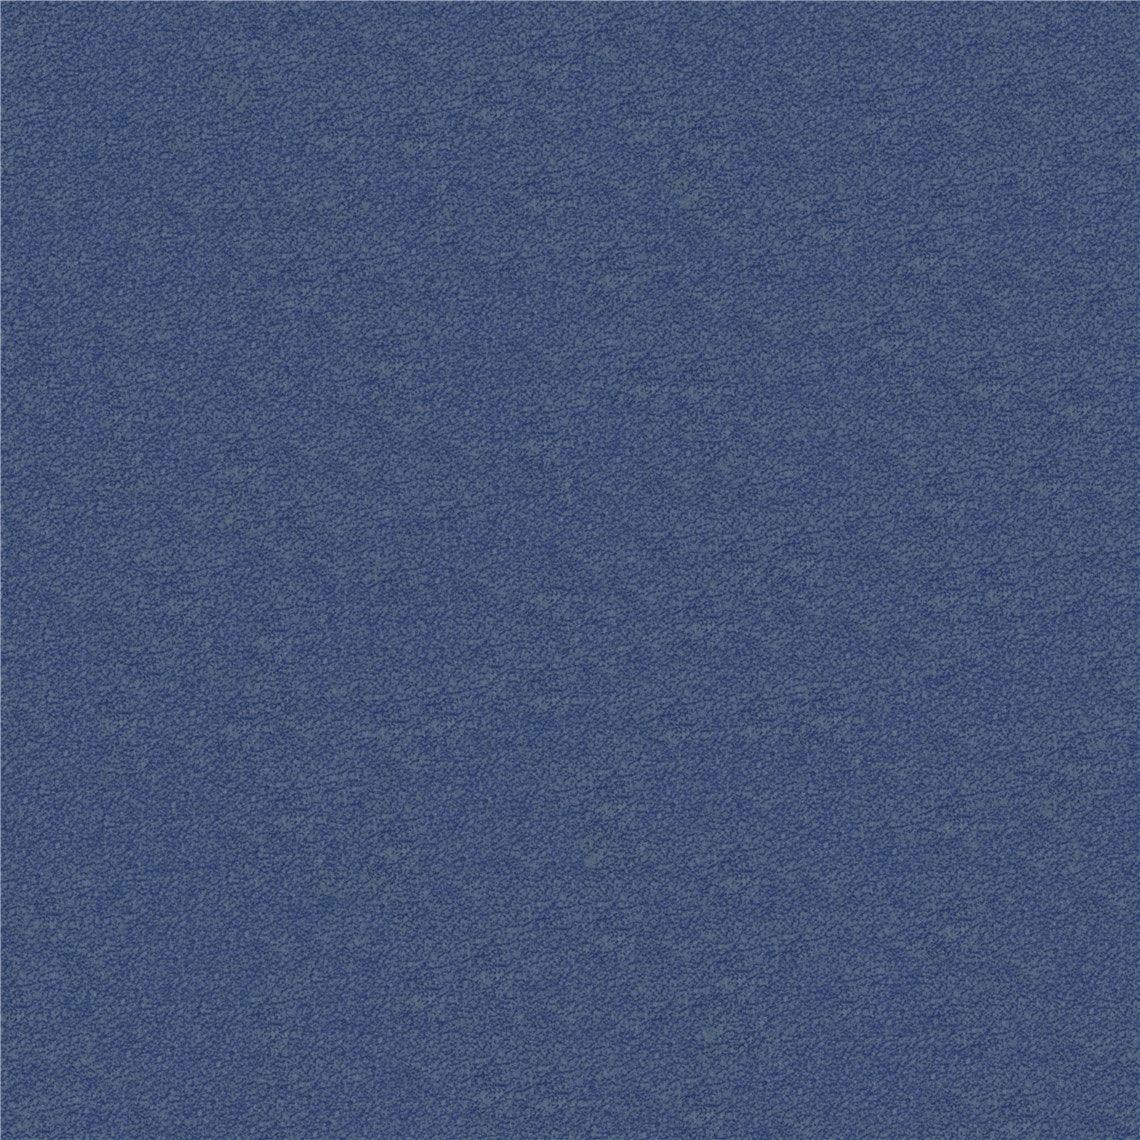  Liz Jordan-Hill Dark Grey Luxury Chenille Upholstery Fabric by  The Yard, Pet-Friendly Water Cleanable Stain Resistant Aquaclean Material  for Furniture and DIY, AC Spirit 213 Shadow (Sample)